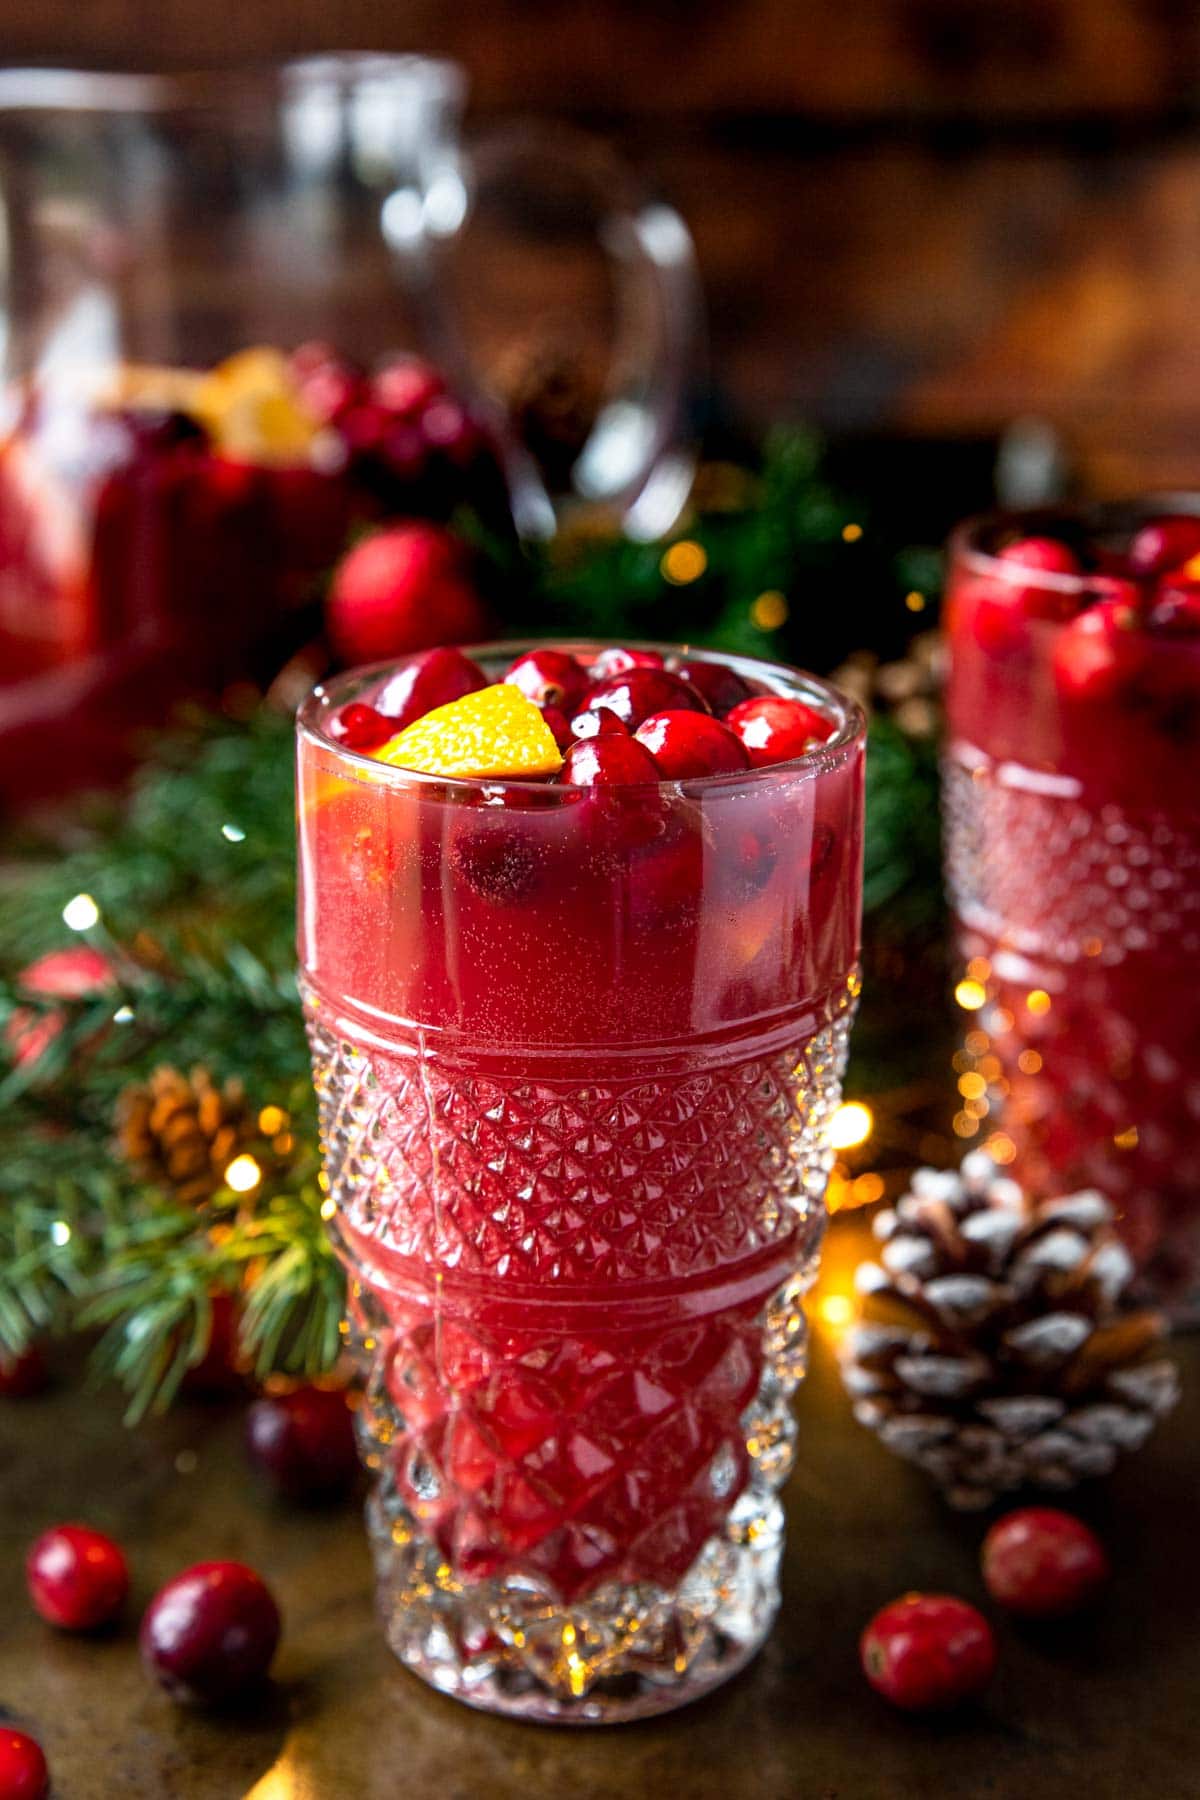 A glass of Christmas Punch garnished with cranberries and oranges